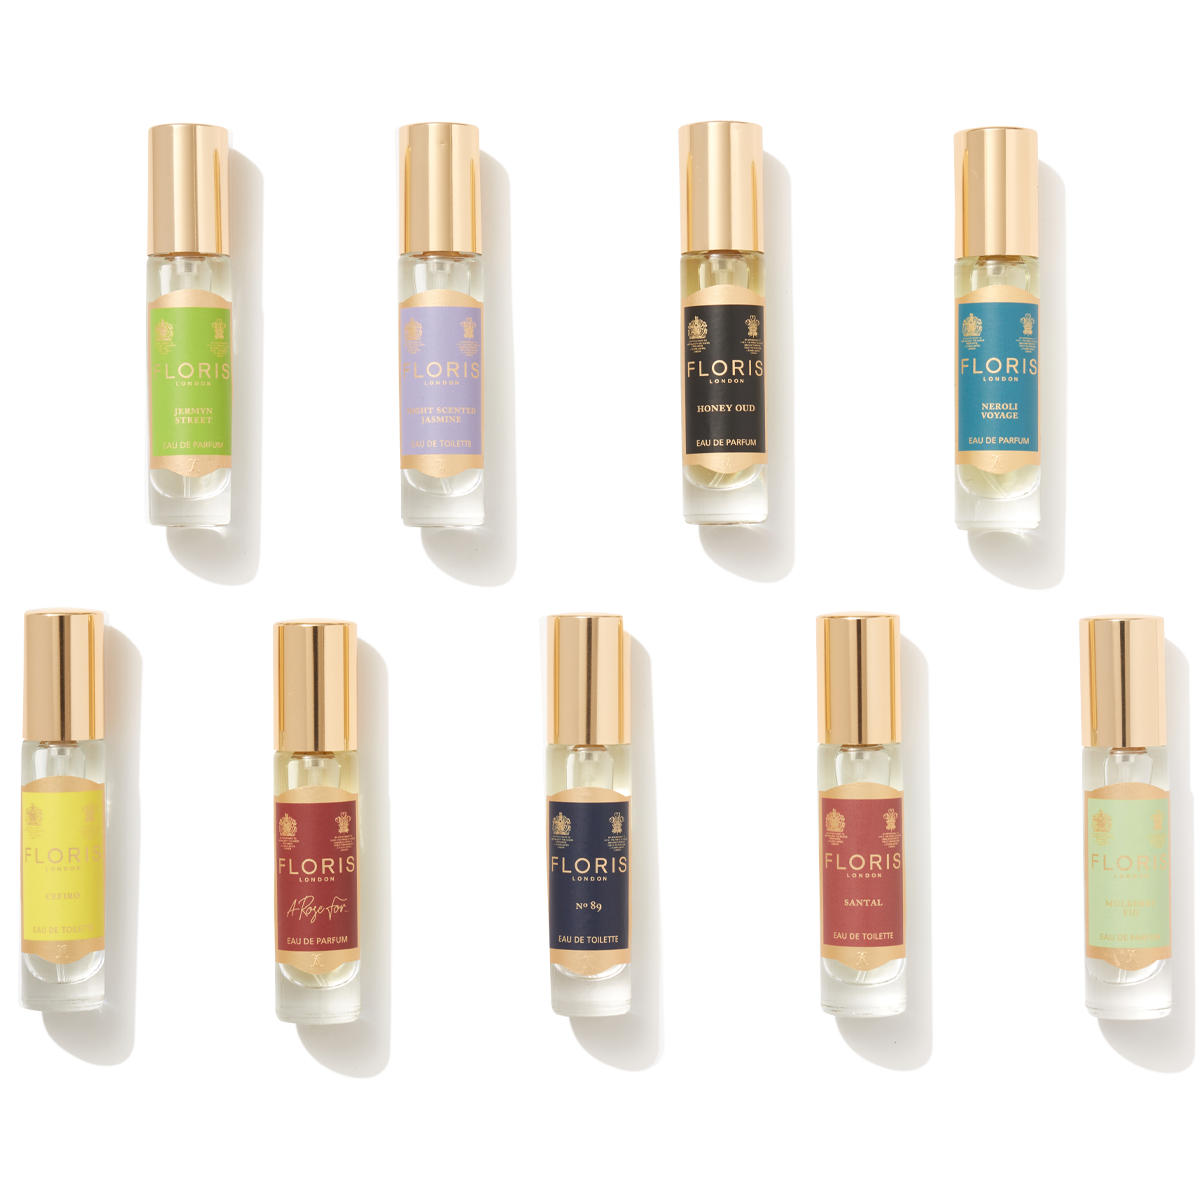 the 9 fragrances contained in the fragrance case from left to right: jermyn street, night scented jasmine, honey oud, neroli voyage, cefiro, a rose for, no.89, santal and mulberry fig.